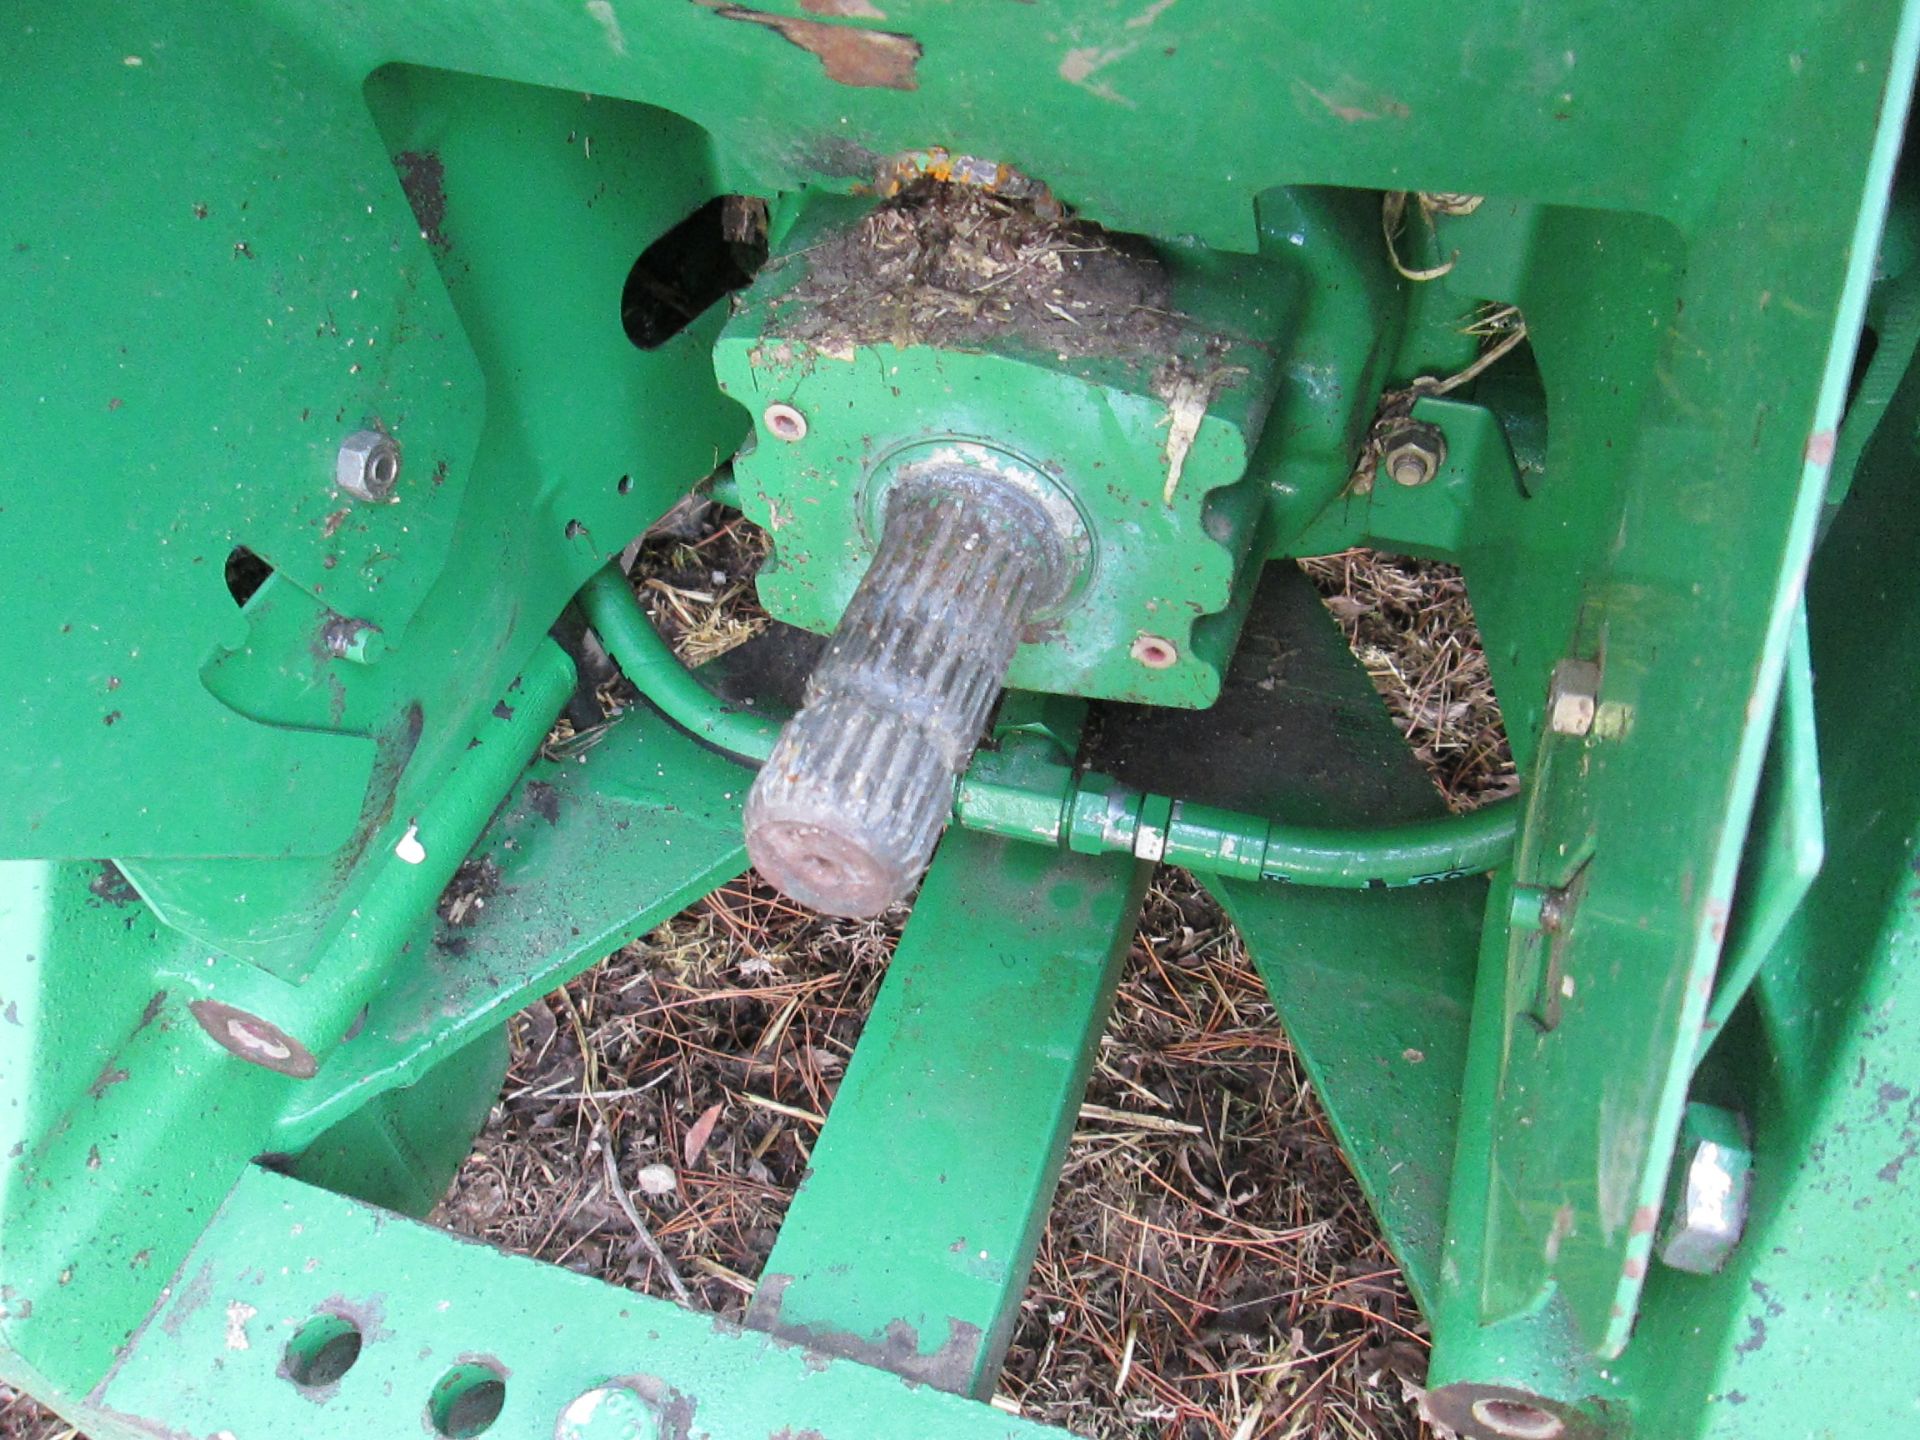 ’02 JD 8420 MFWD,(SN RW8420P007155)P.S.,FRONT SUSPENSION,GREENSTAR READY,480X50 DUALS,4921 HRS. - Image 6 of 19